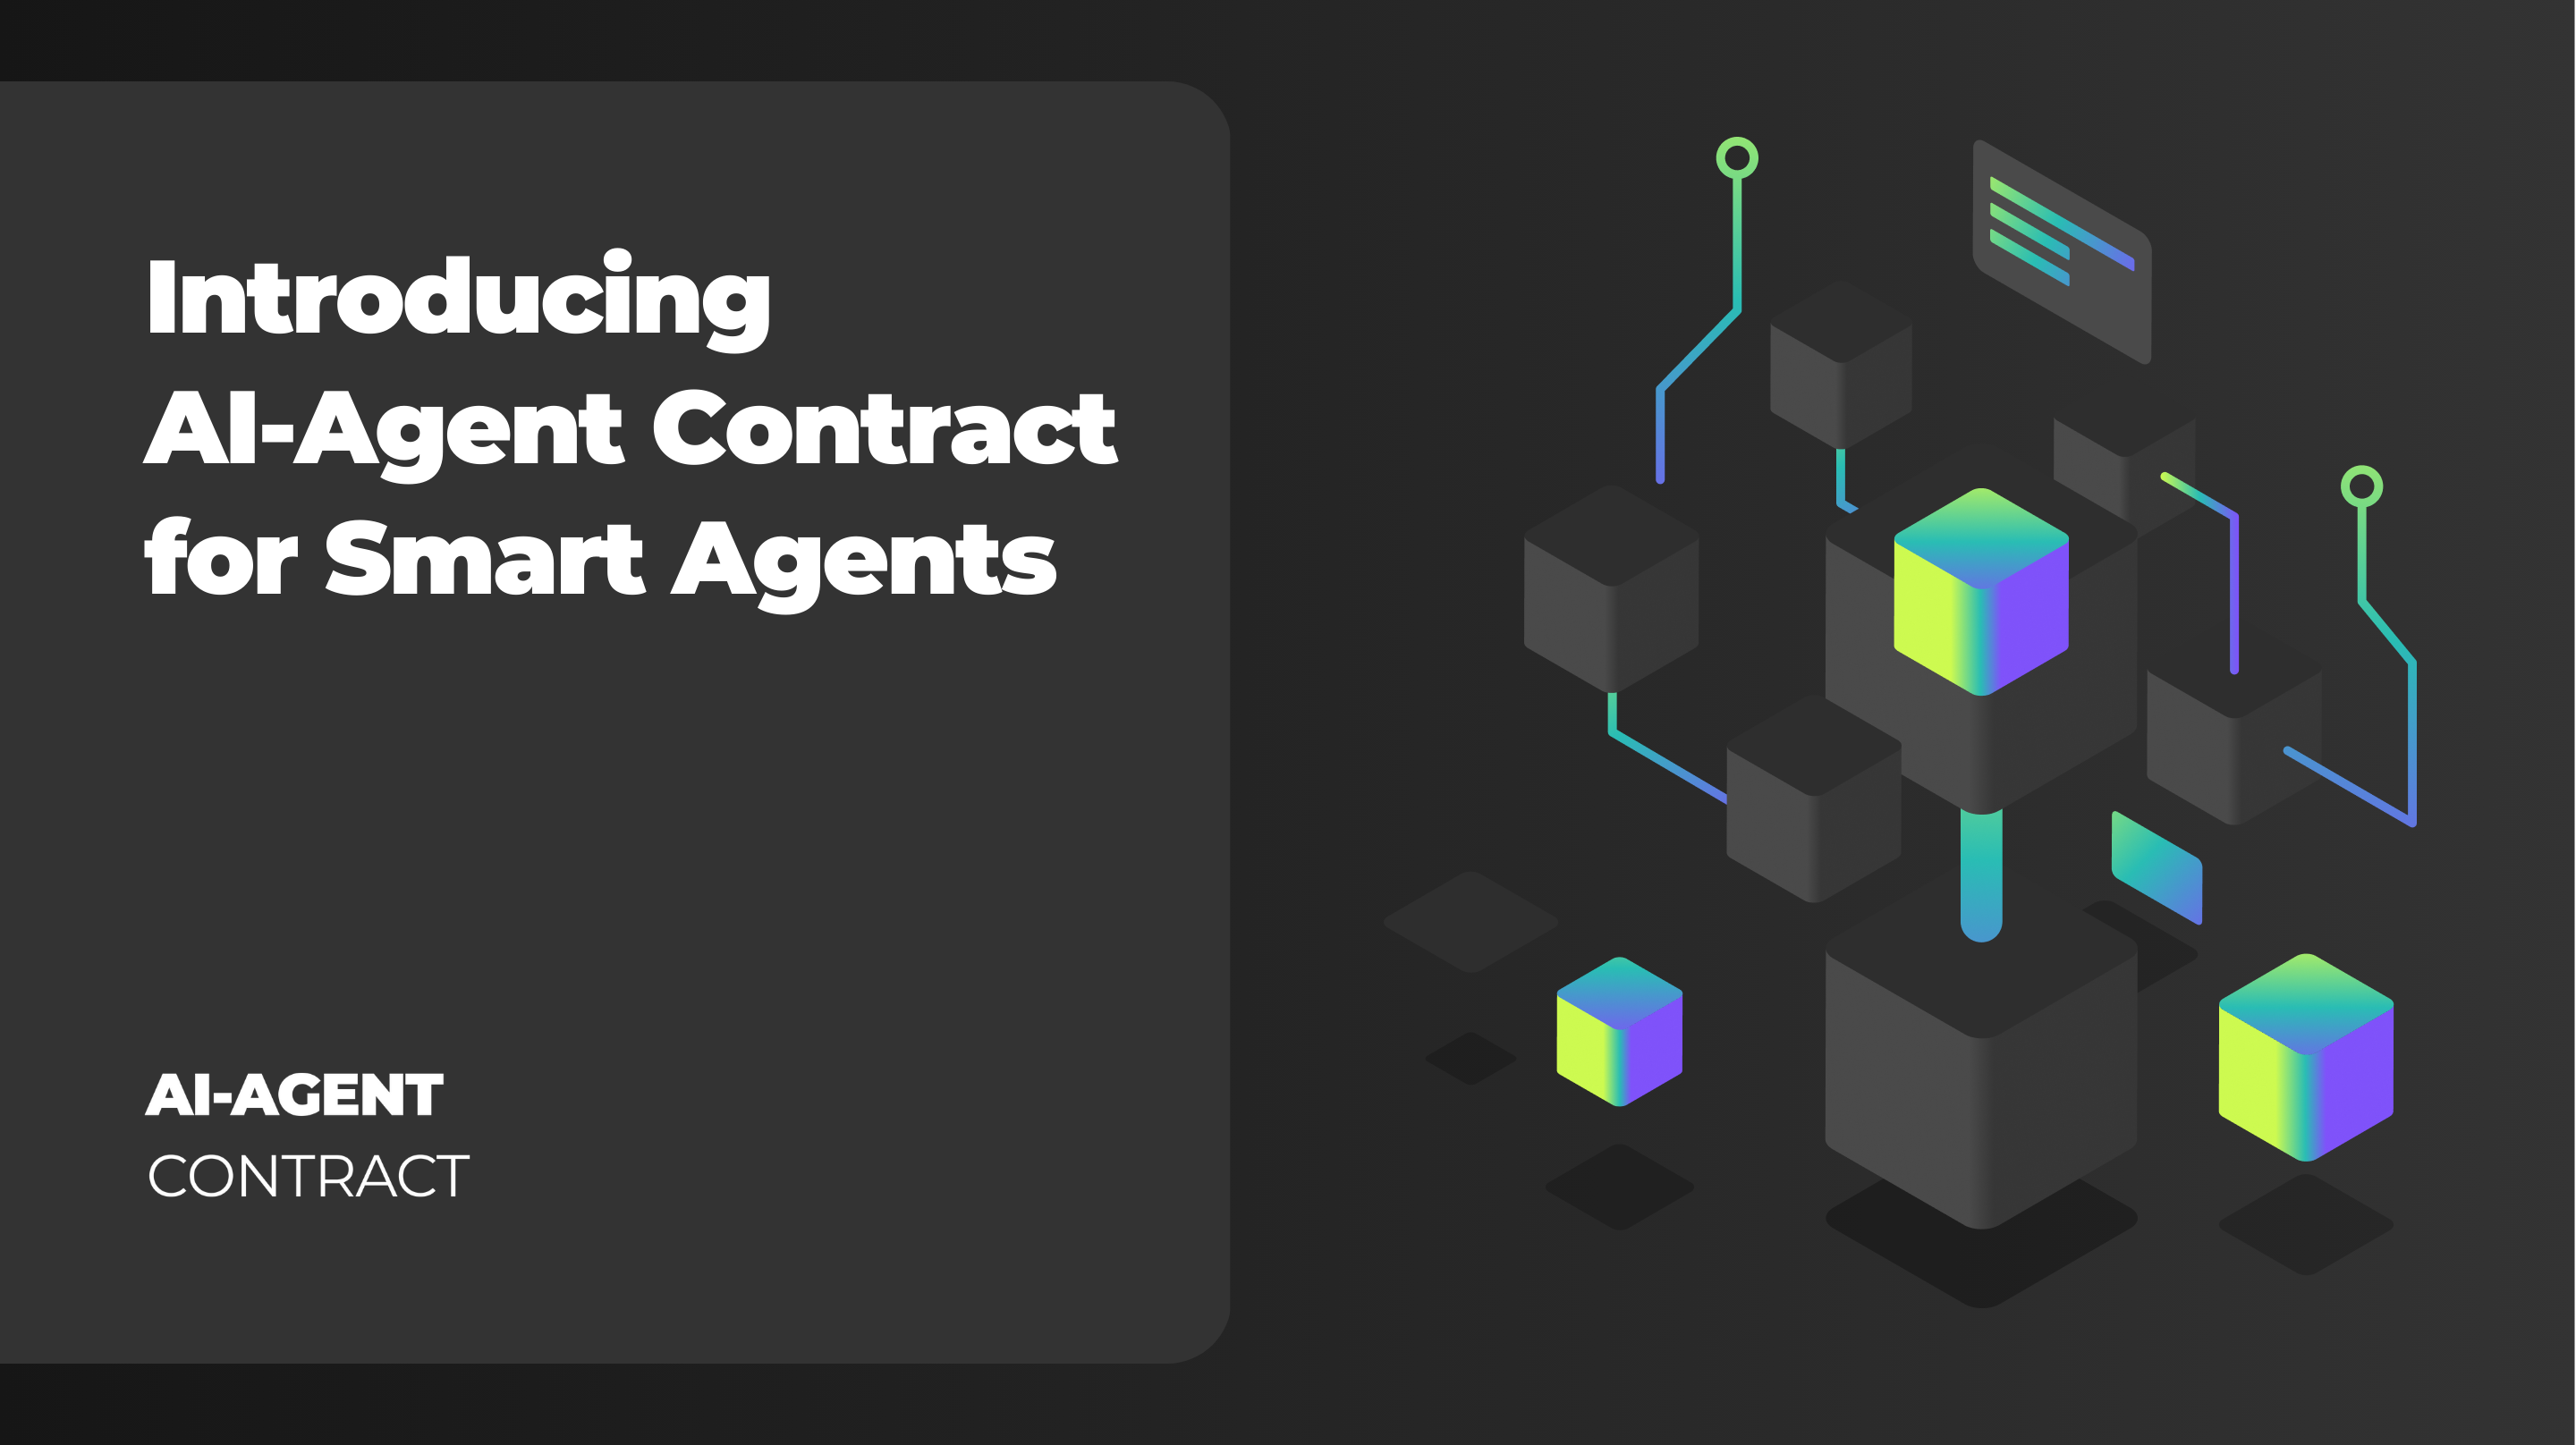 Introducing AI-Agent Contract for Smart Agents